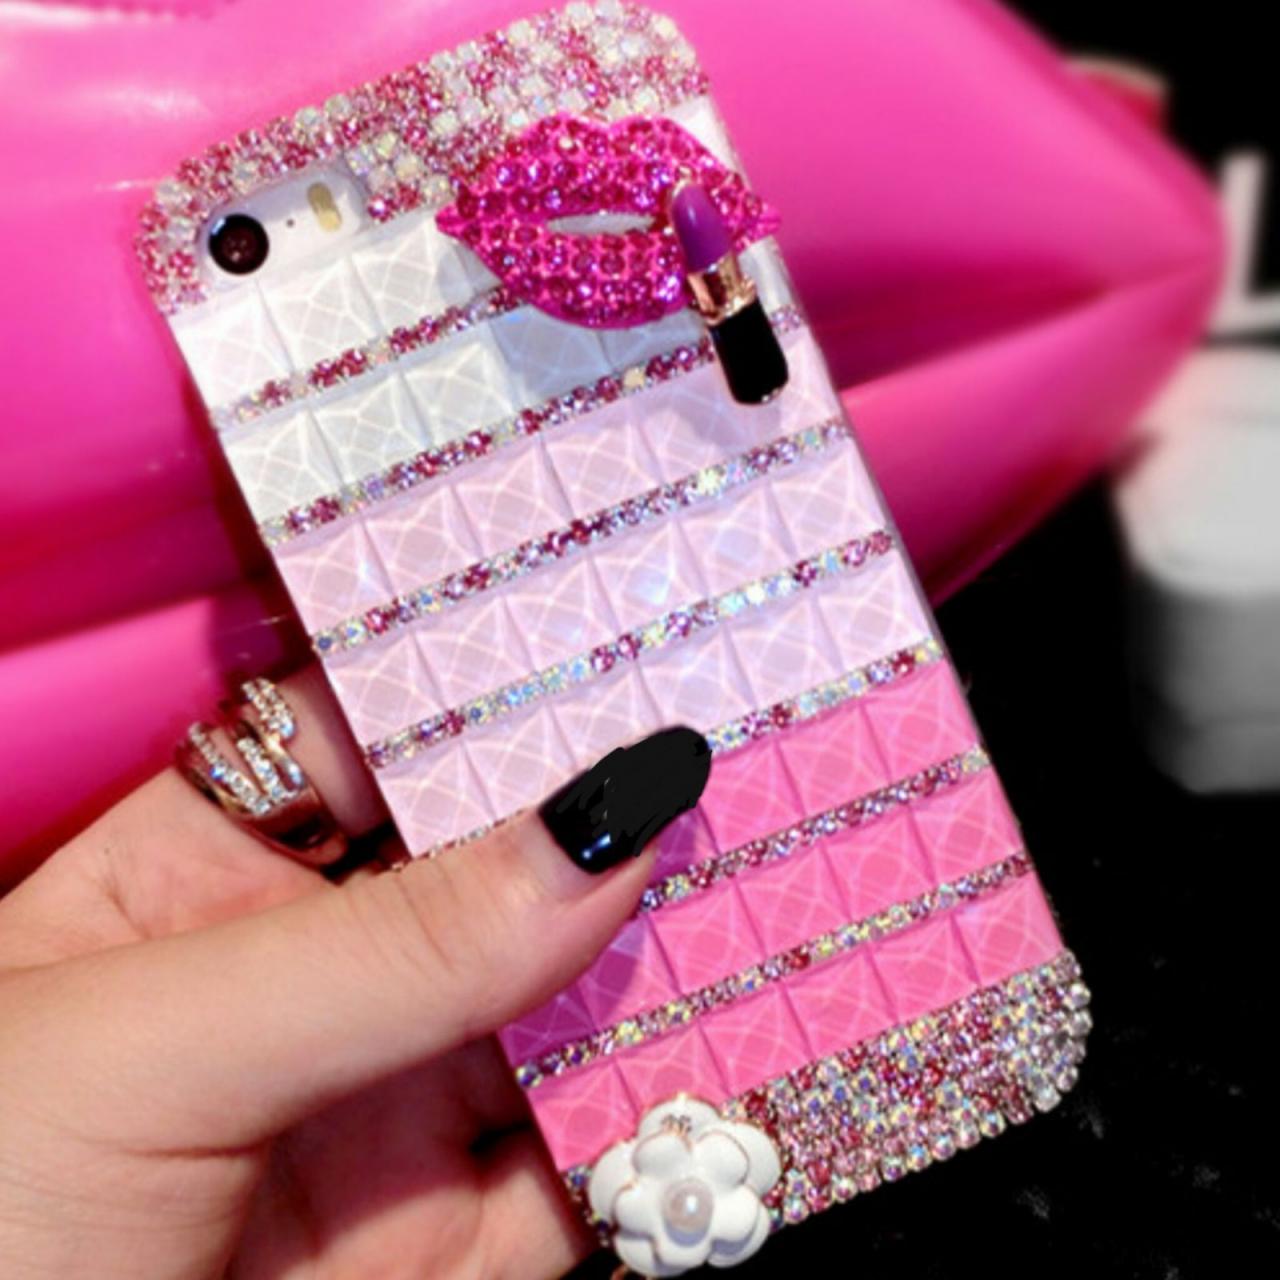 Mouth Bling Iphone 7 Plus, Iphone 6 6s Case, Iphone 6 6s Plus Case, Iphone 5s Se Case, Iphone 5c Case, Bling Wallet Case For Samsung Galaxy Note